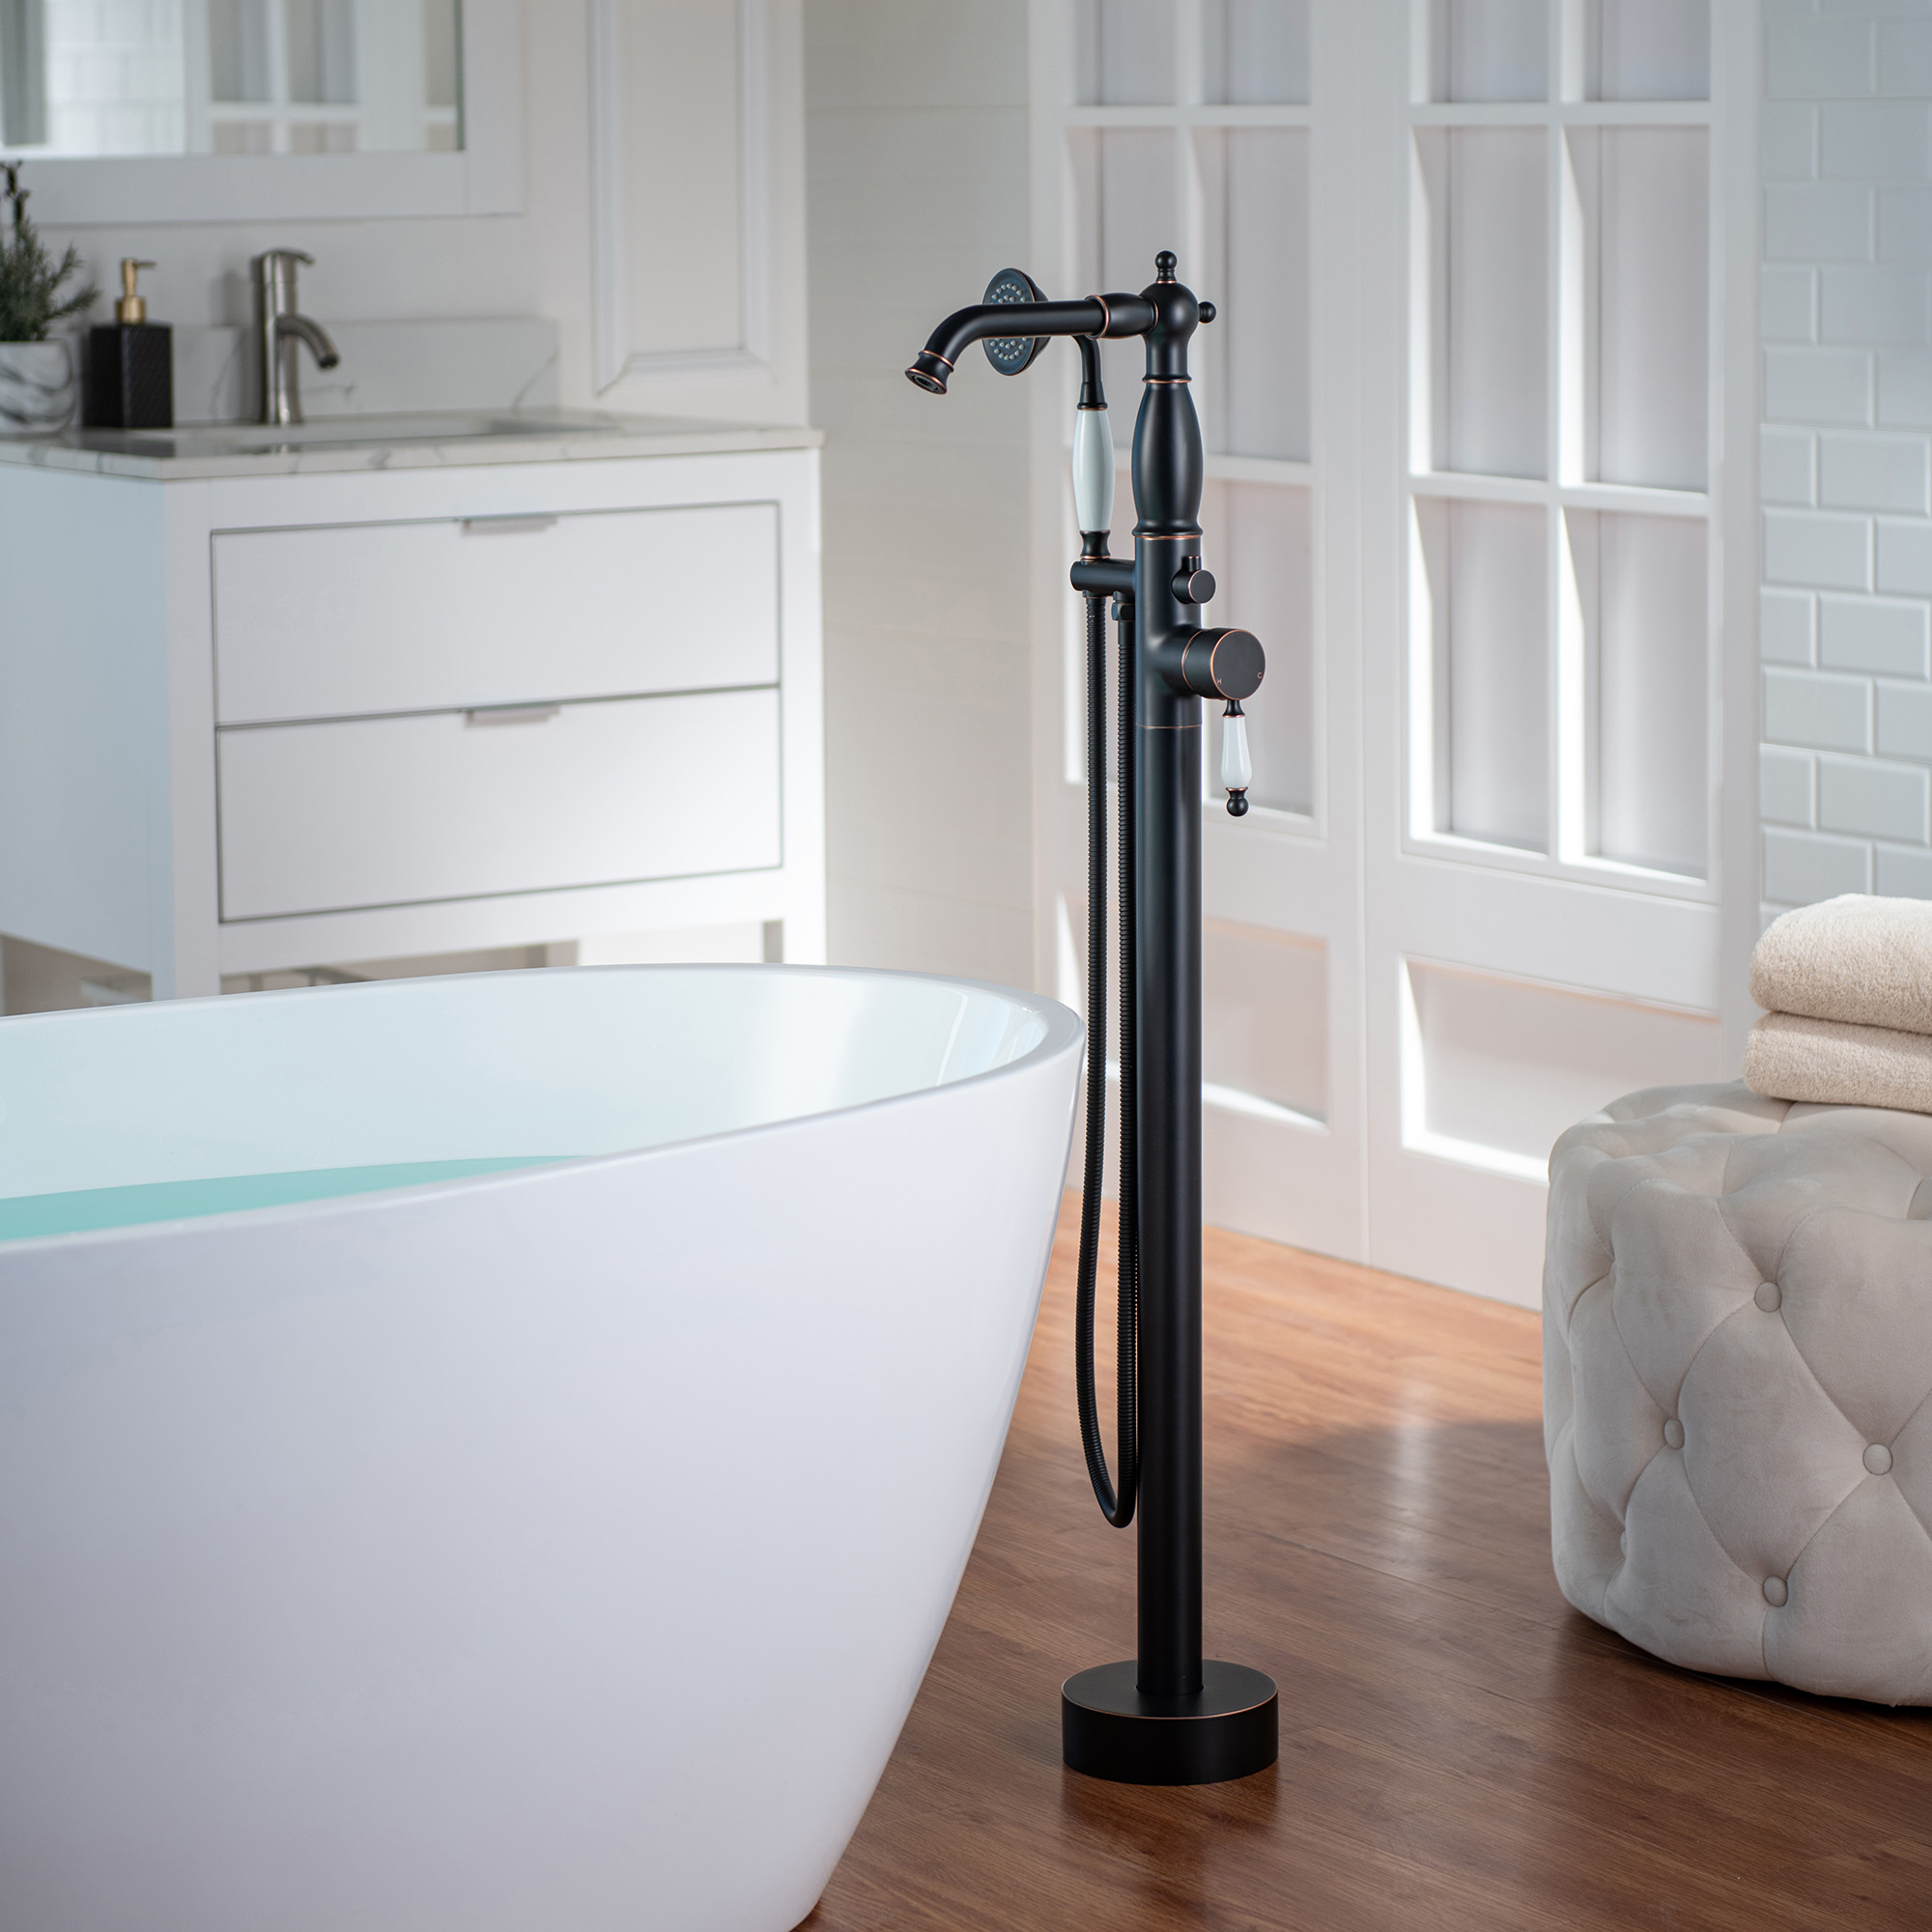  WOODBRIDGE F0049ORB Fusion Single Handle Floor Mount Freestanding Tub Filler Faucet with Telephone Hand shower in Oil Rubbed Bronze Finish_12279